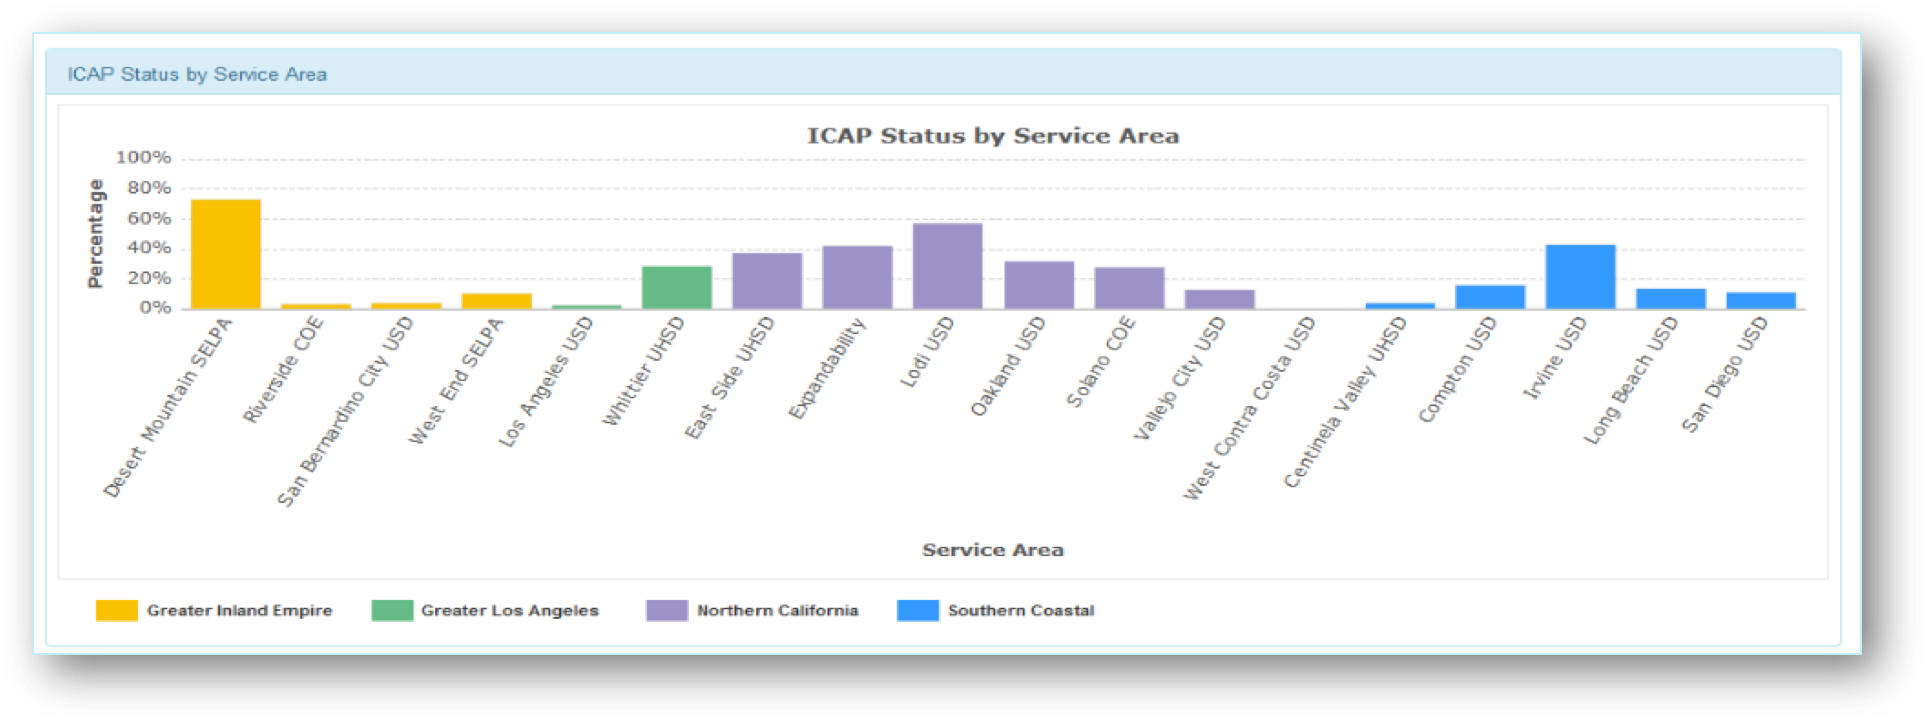 Screenshot image of the Work Experience Status by Service Area chart.